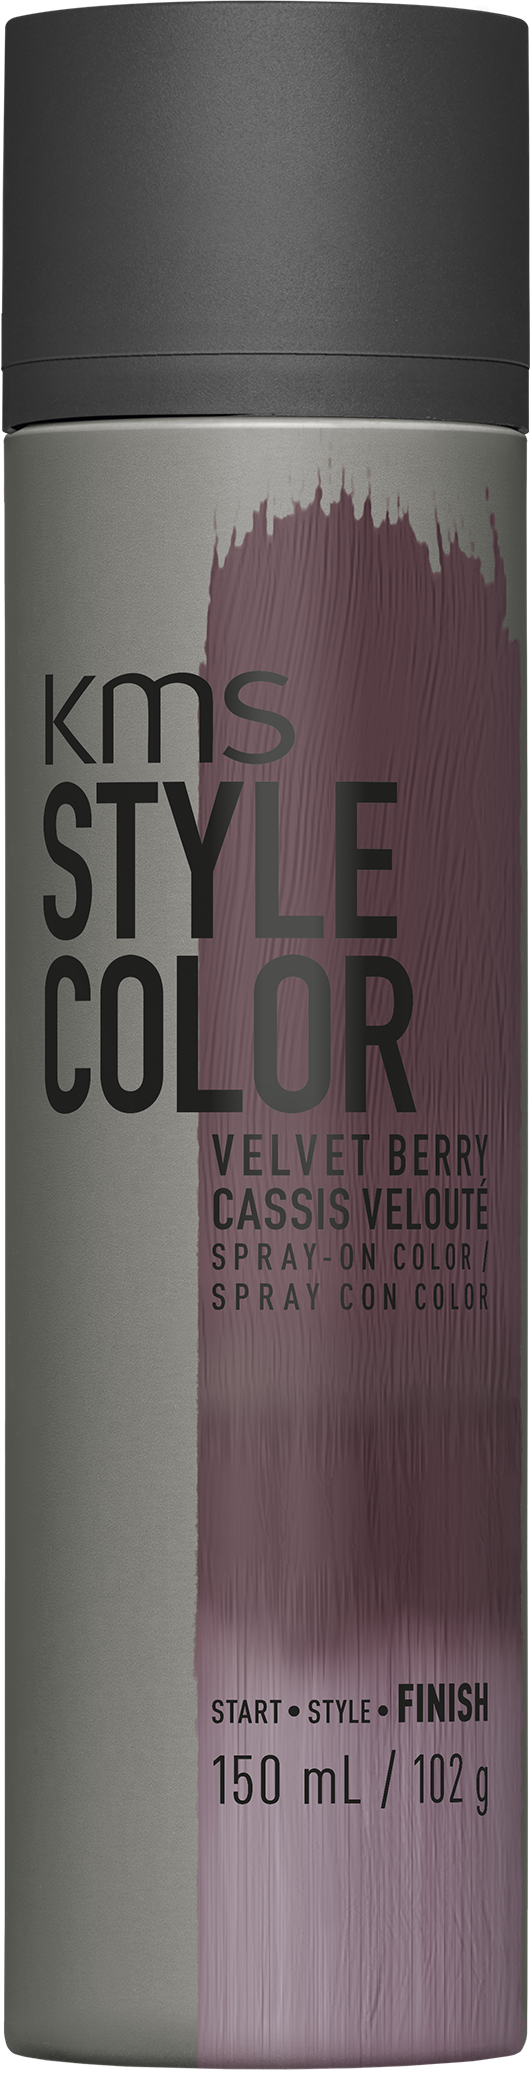 KMS STYLE COLOR  - 150ml